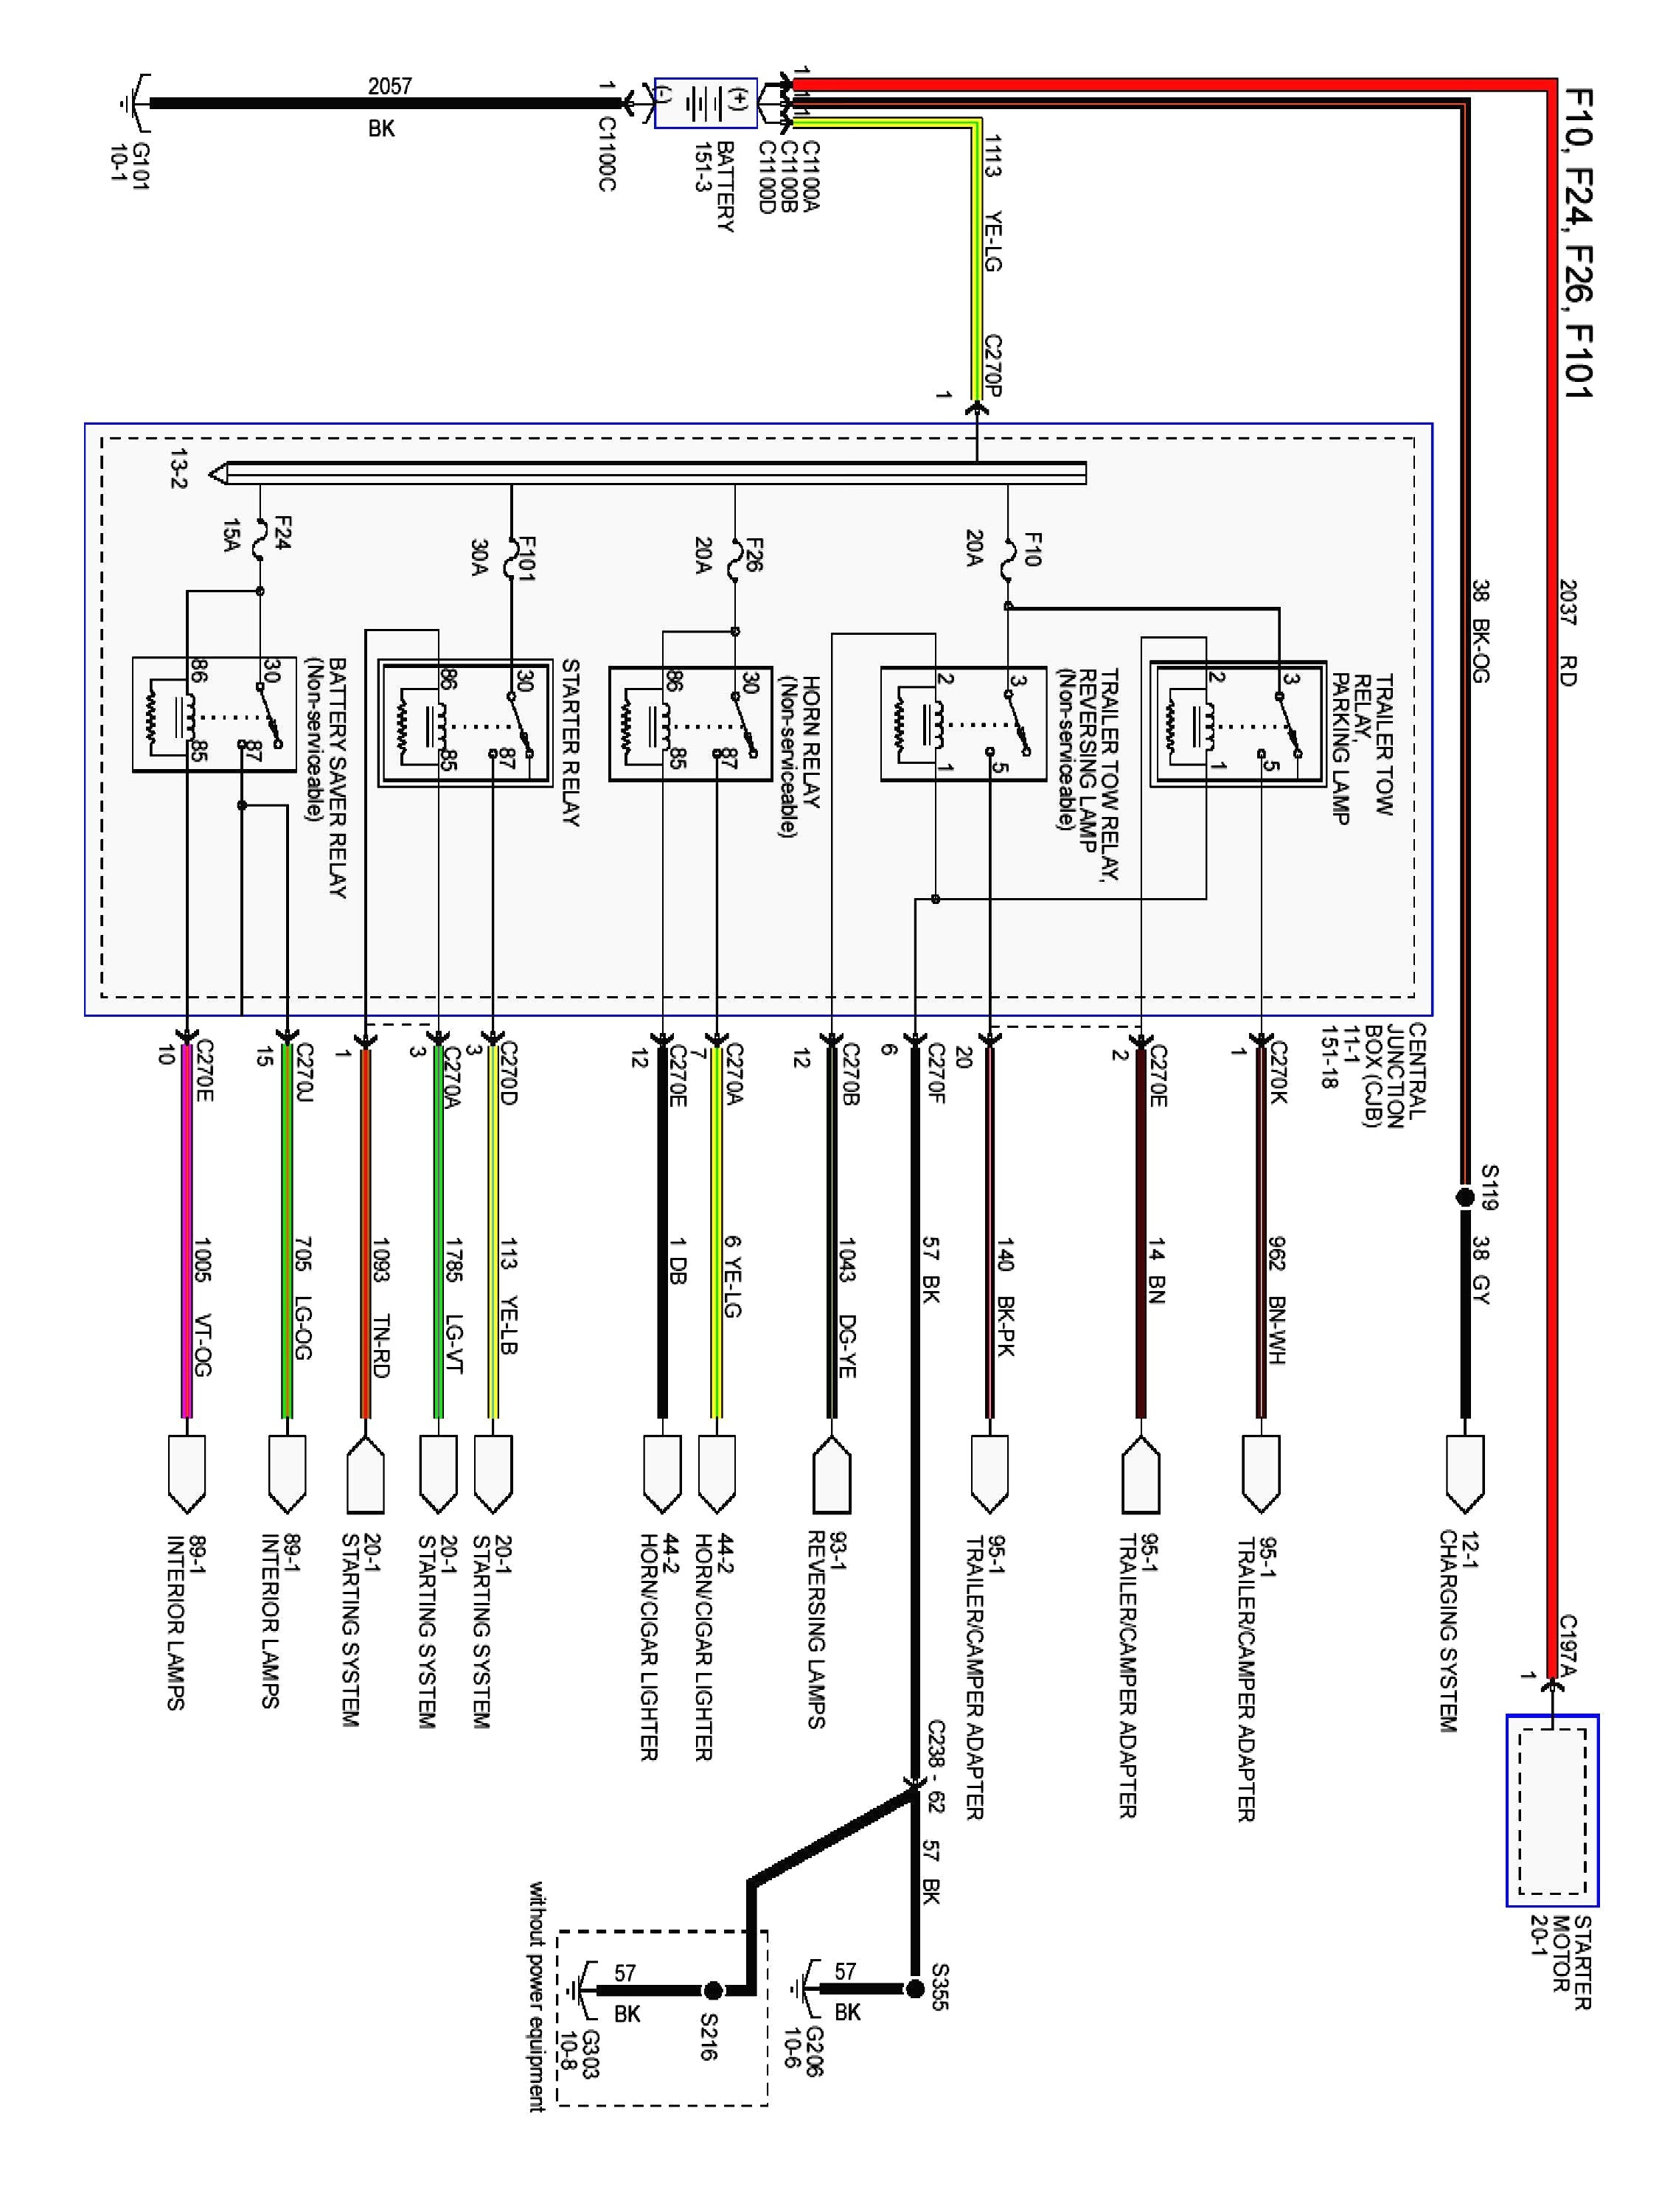 2006 Ford F150 Stereo Wiring Harness Diagram from detoxicrecenze.com